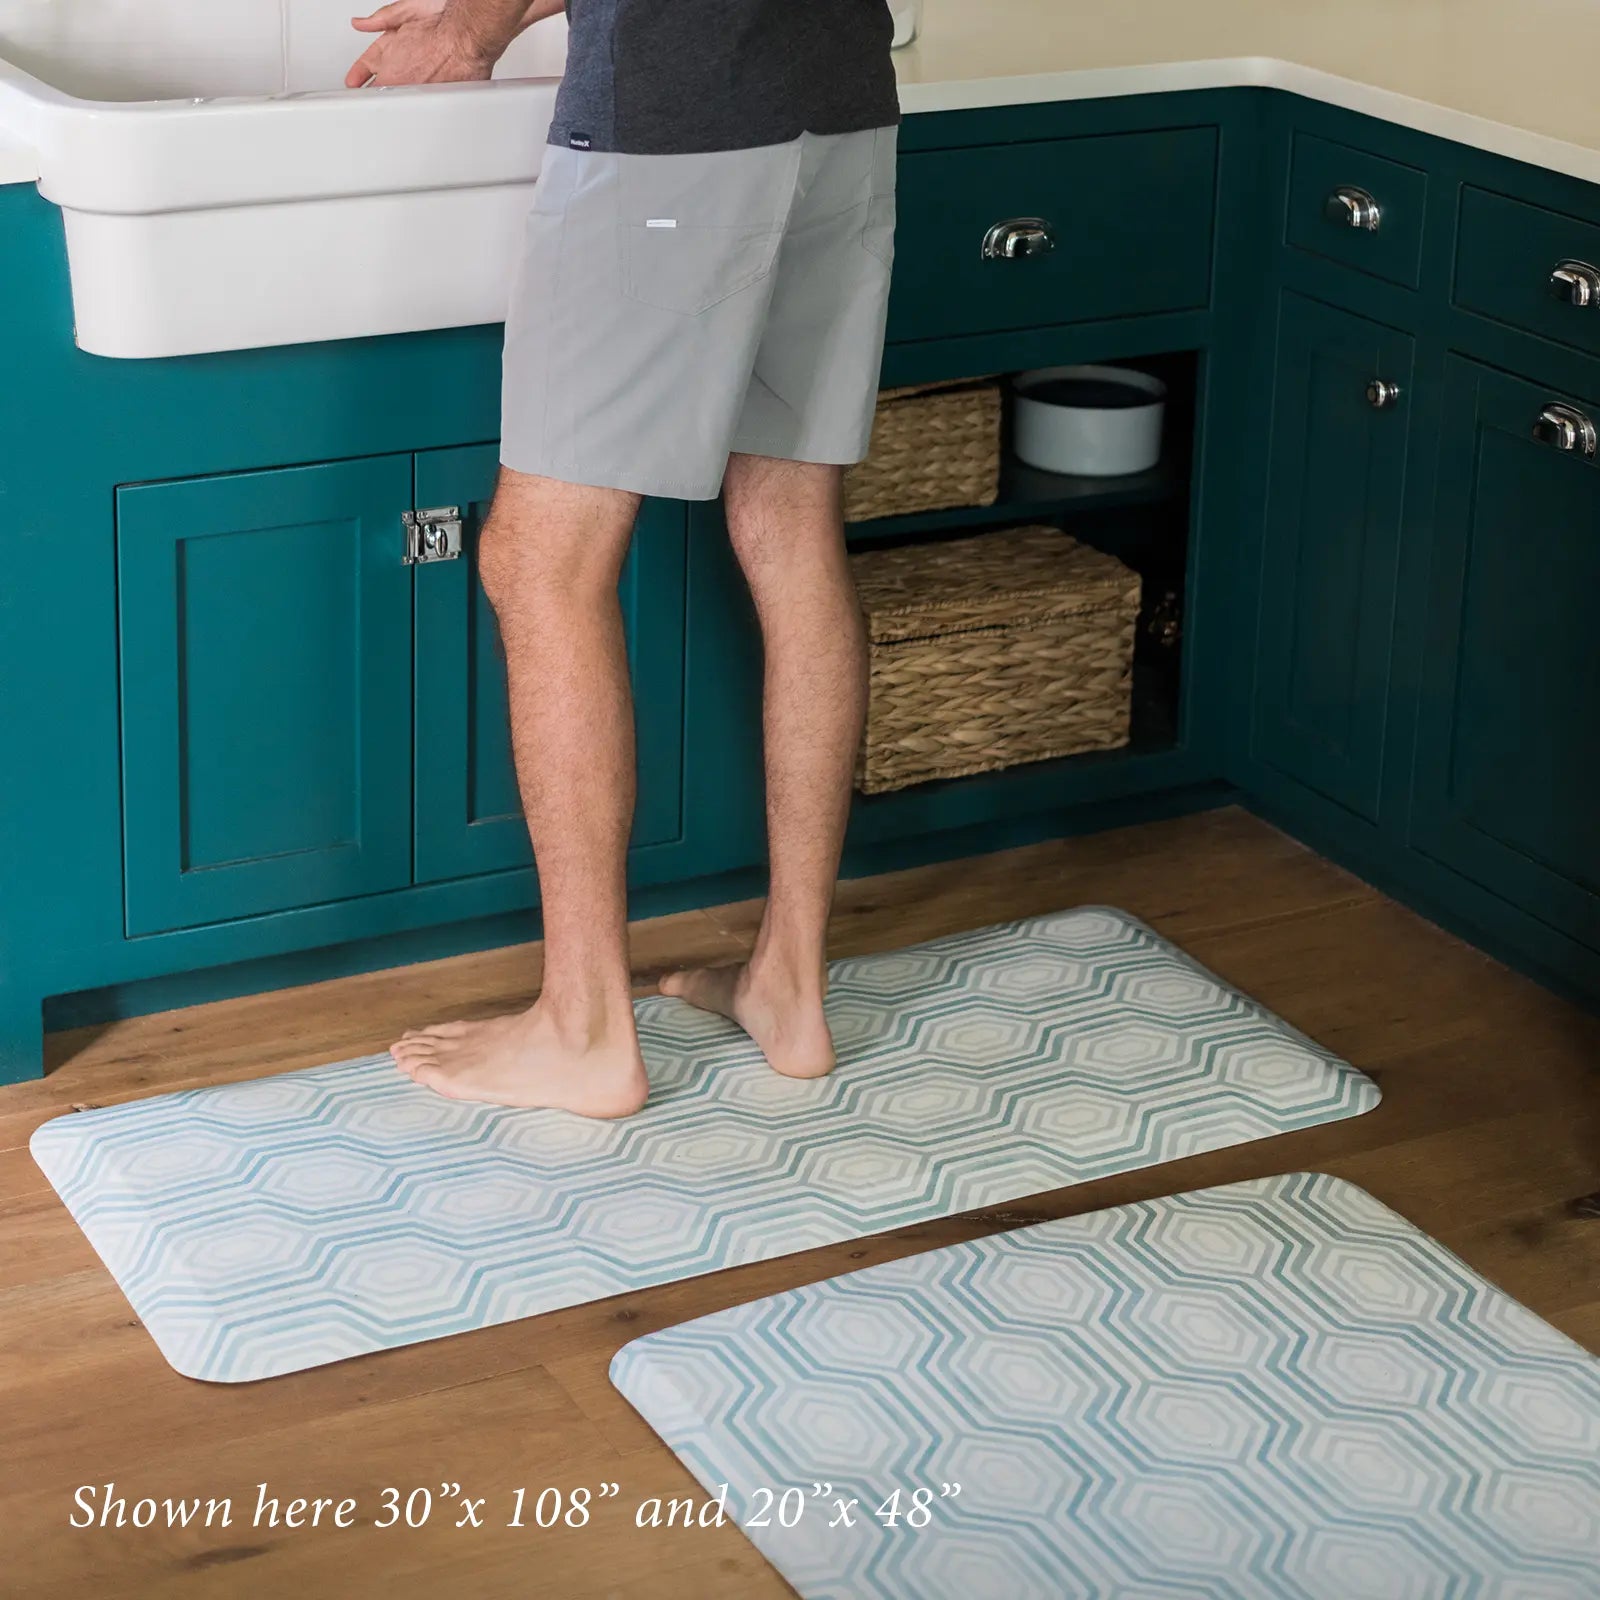 Blake waves blue and white mod preppy geometric print kitchen mat shown in sizes 30x108 and 20x48 in front of sink with man standing.